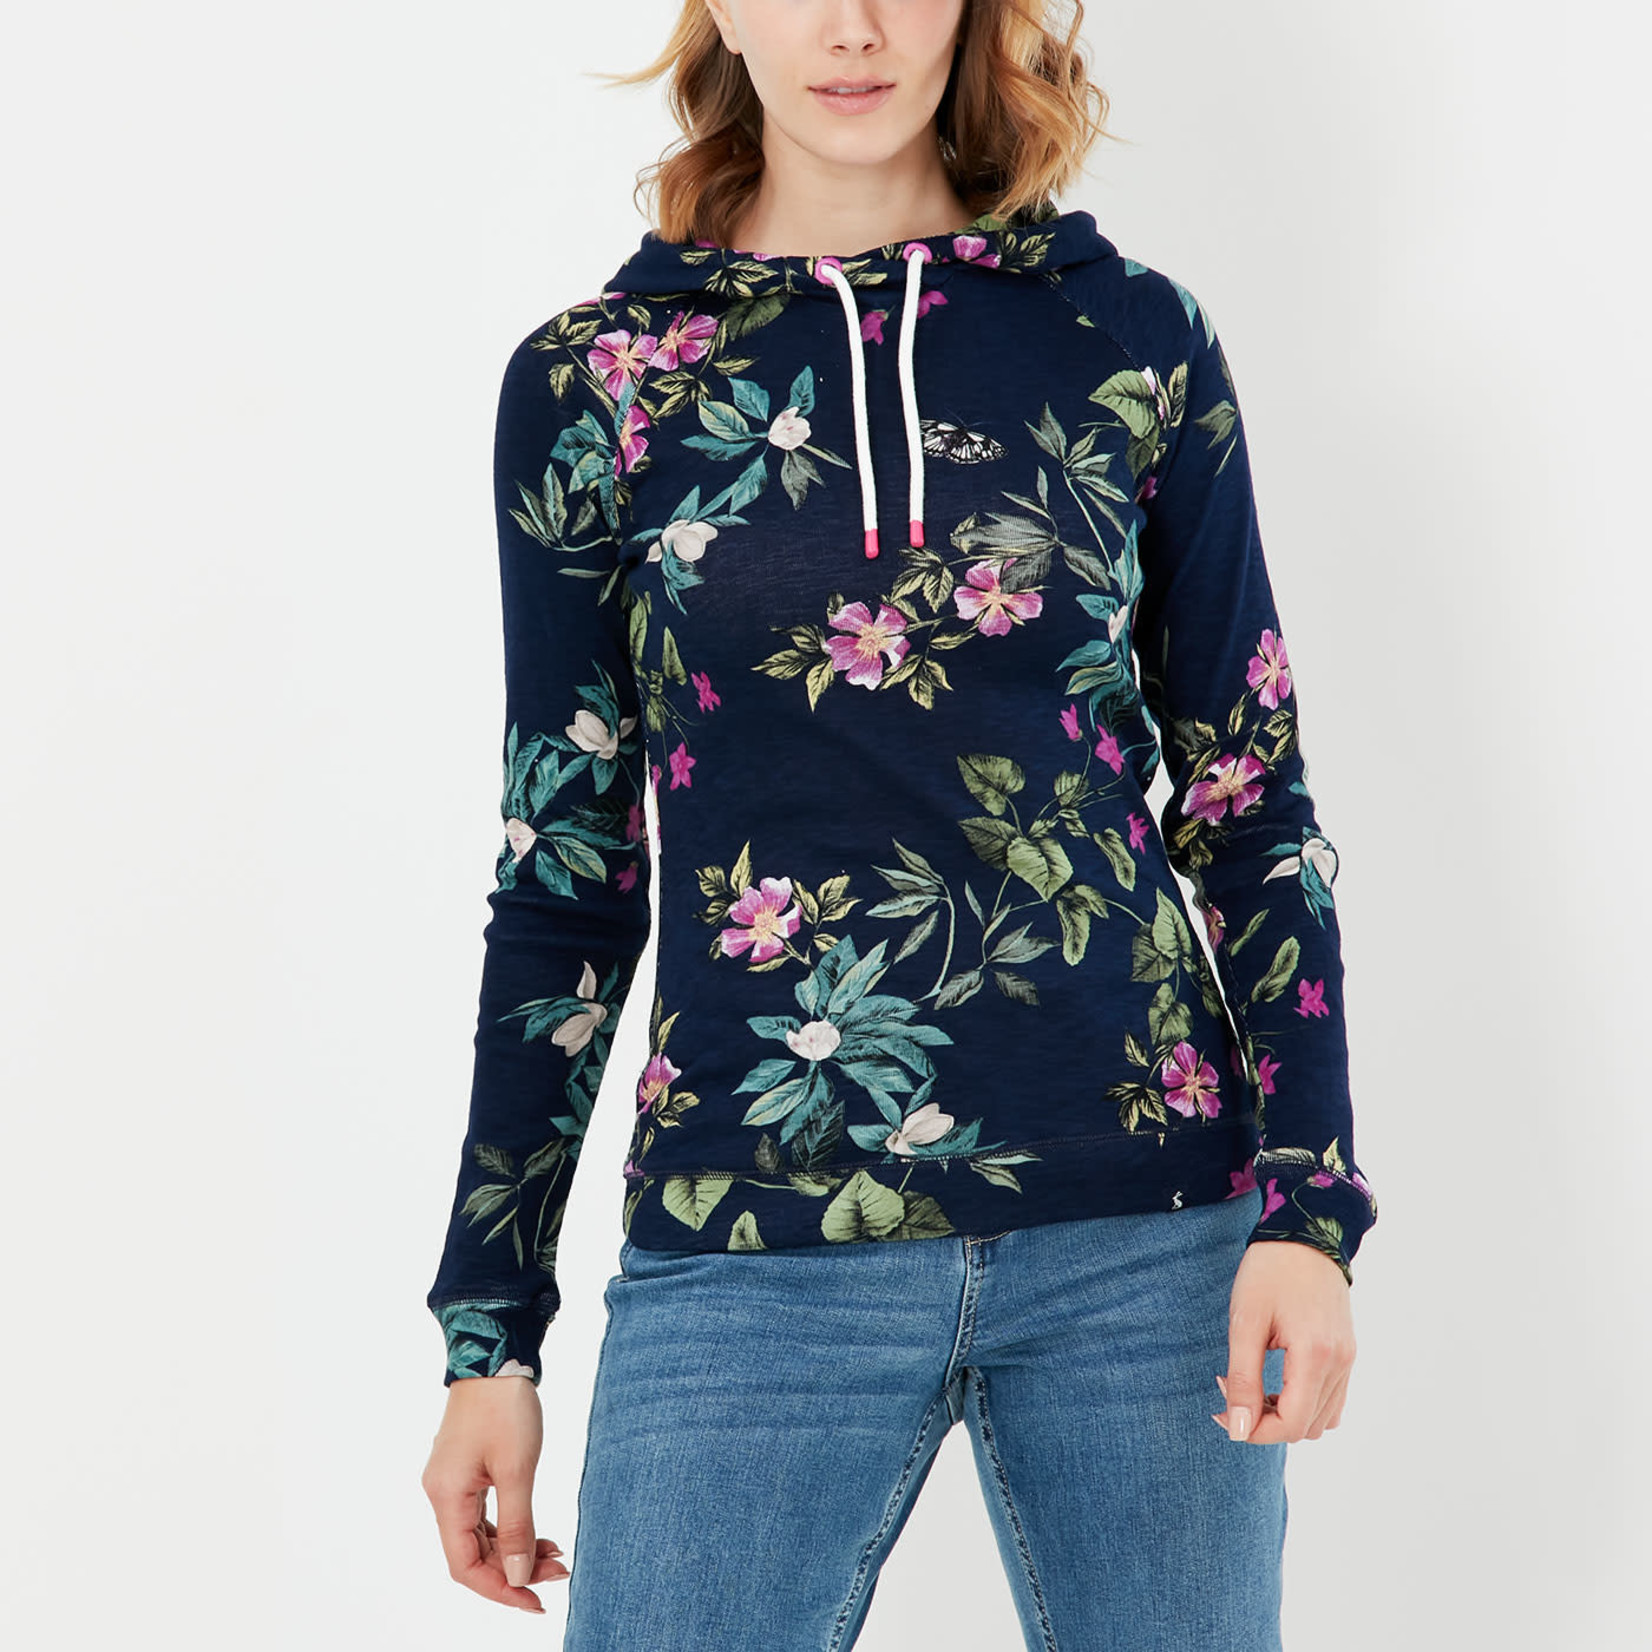 Joules for Women Marlston Navy Floral Sweatshirt